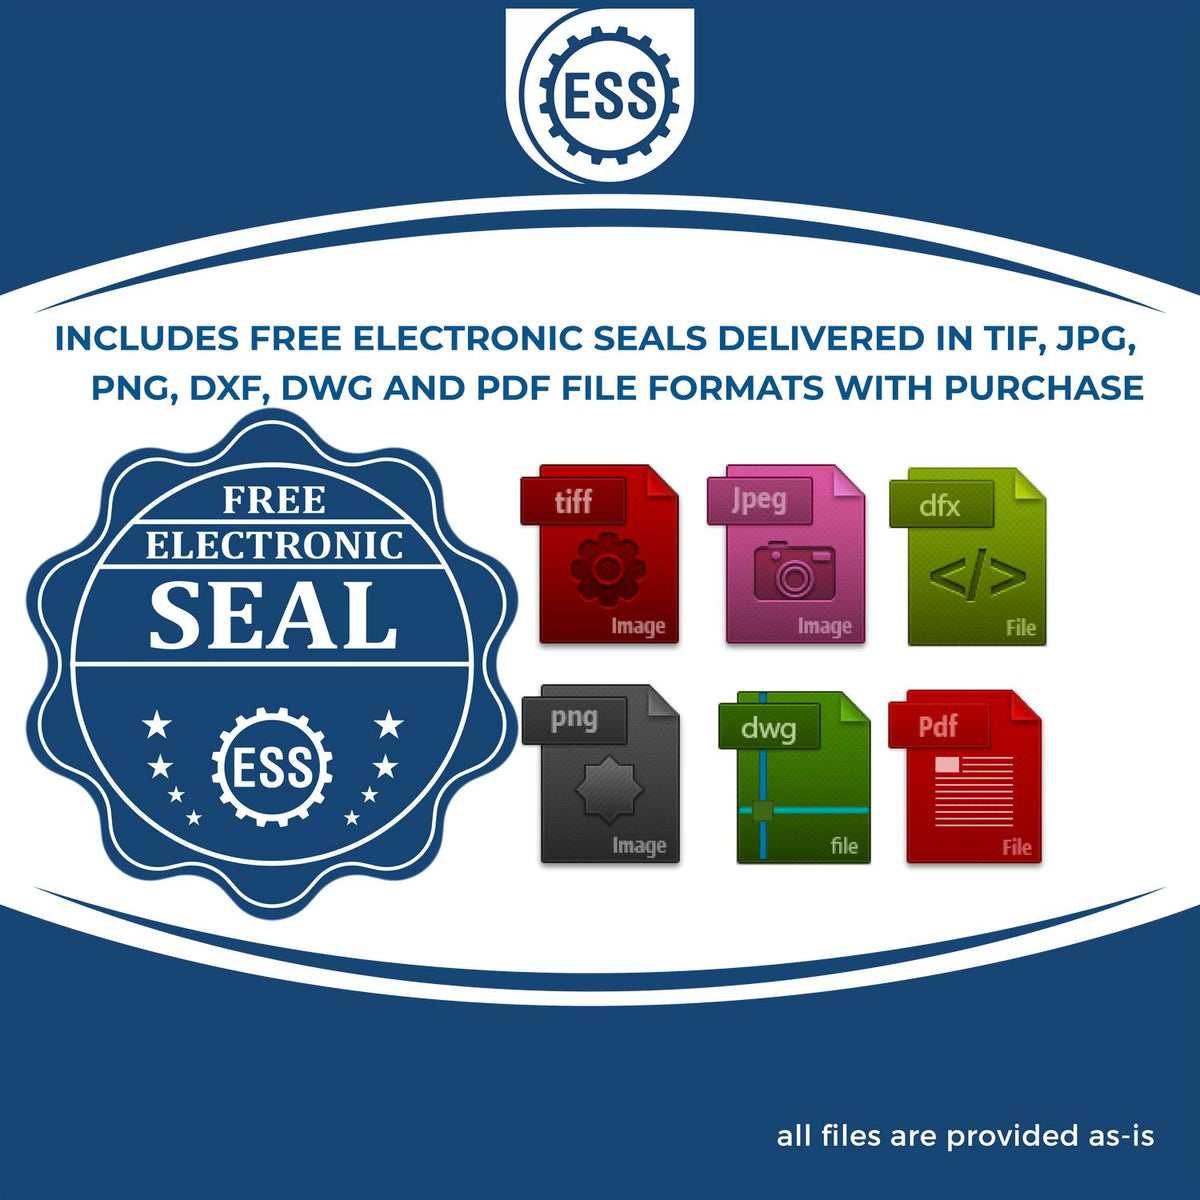 An infographic for the free electronic seal for the Gift Minnesota Engineer Seal illustrating the different file type icons such as DXF, DWG, TIF, JPG and PNG.